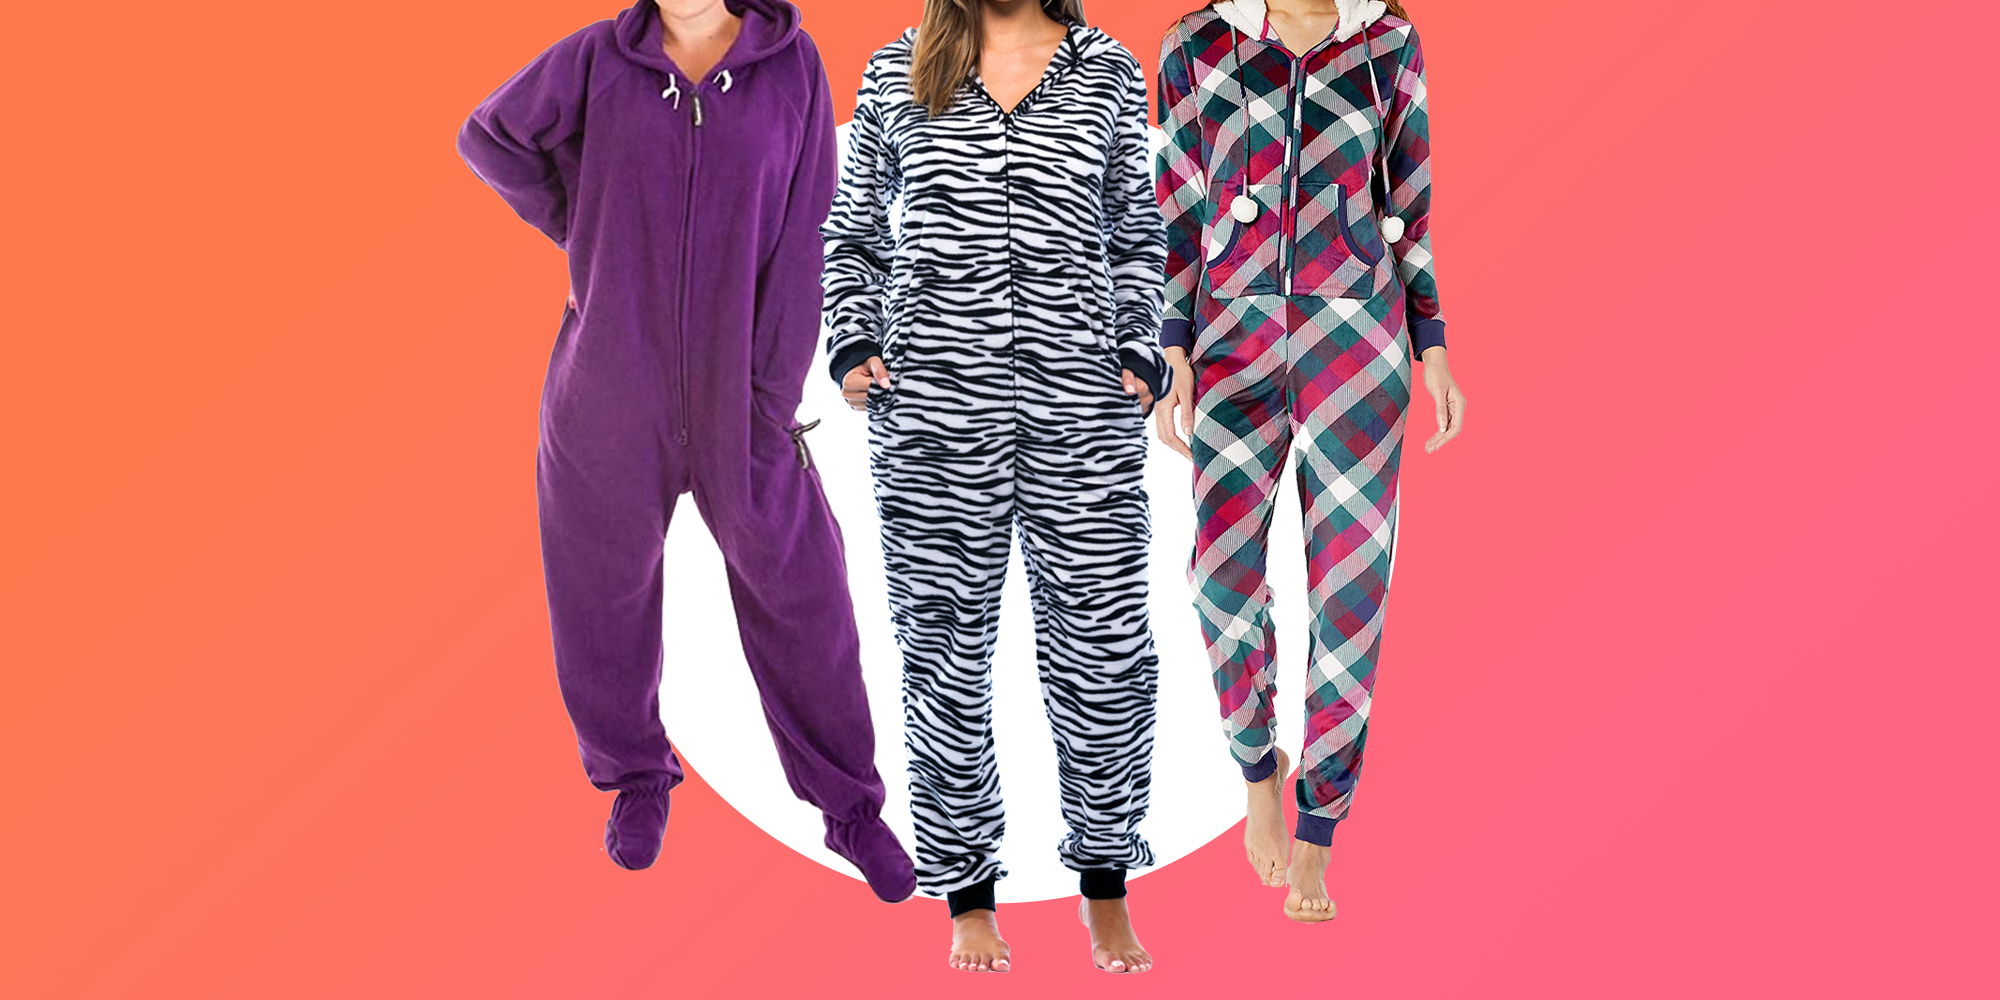 A Brief History of Adult Onesies